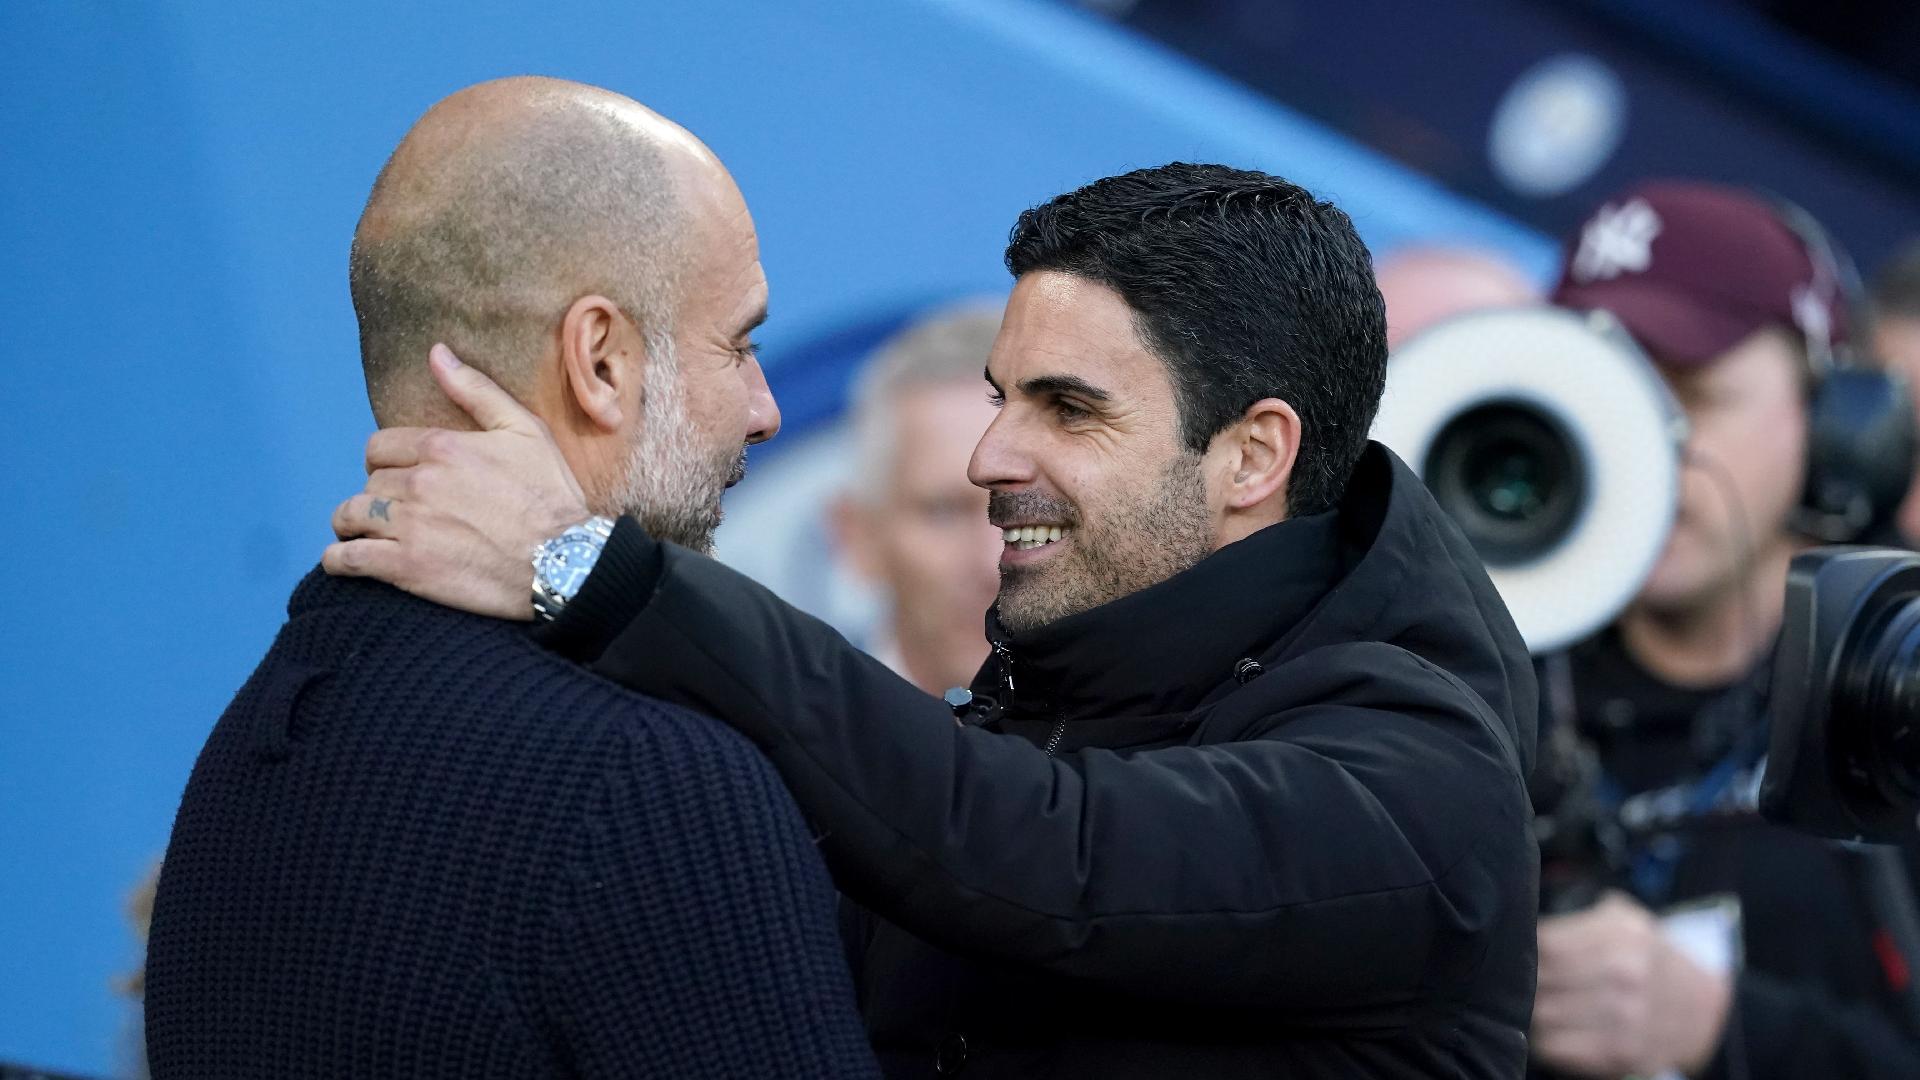 Mikel Arteta says Pep Guardiola ‘best coach in the world’ ahead of Man City game